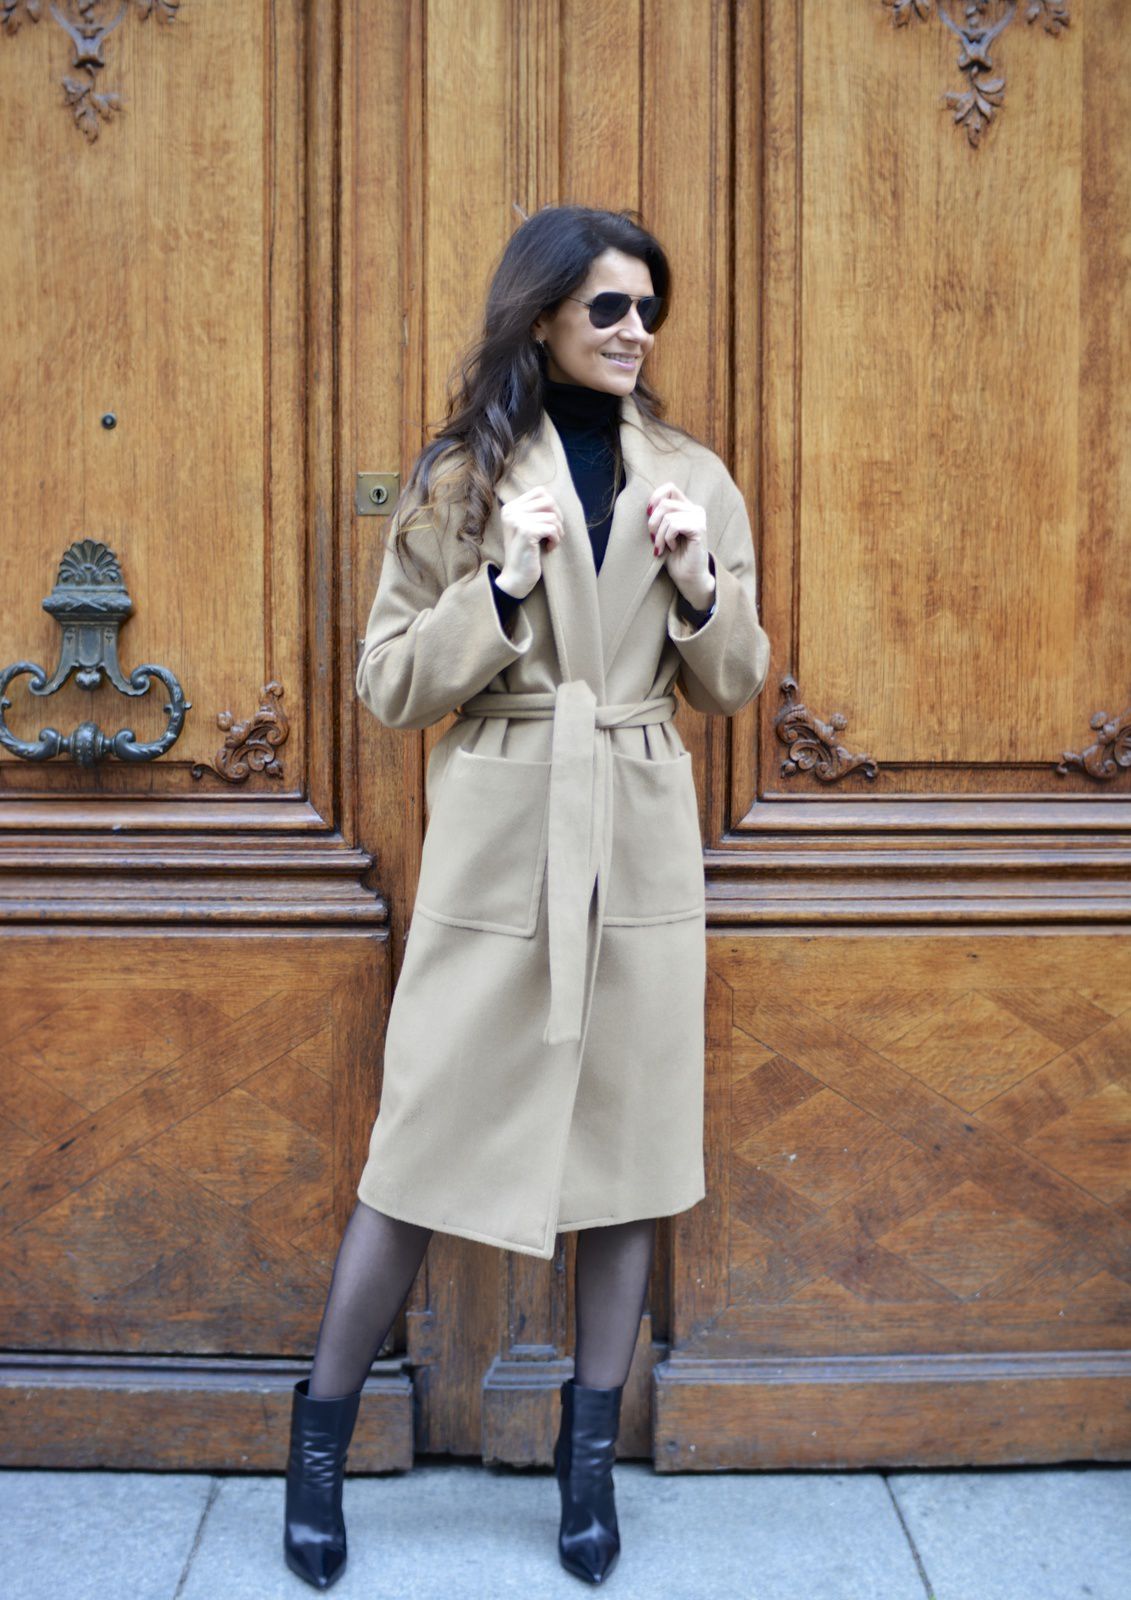 Le manteau peignoir... Adoptez votre style ! - So French By Naty